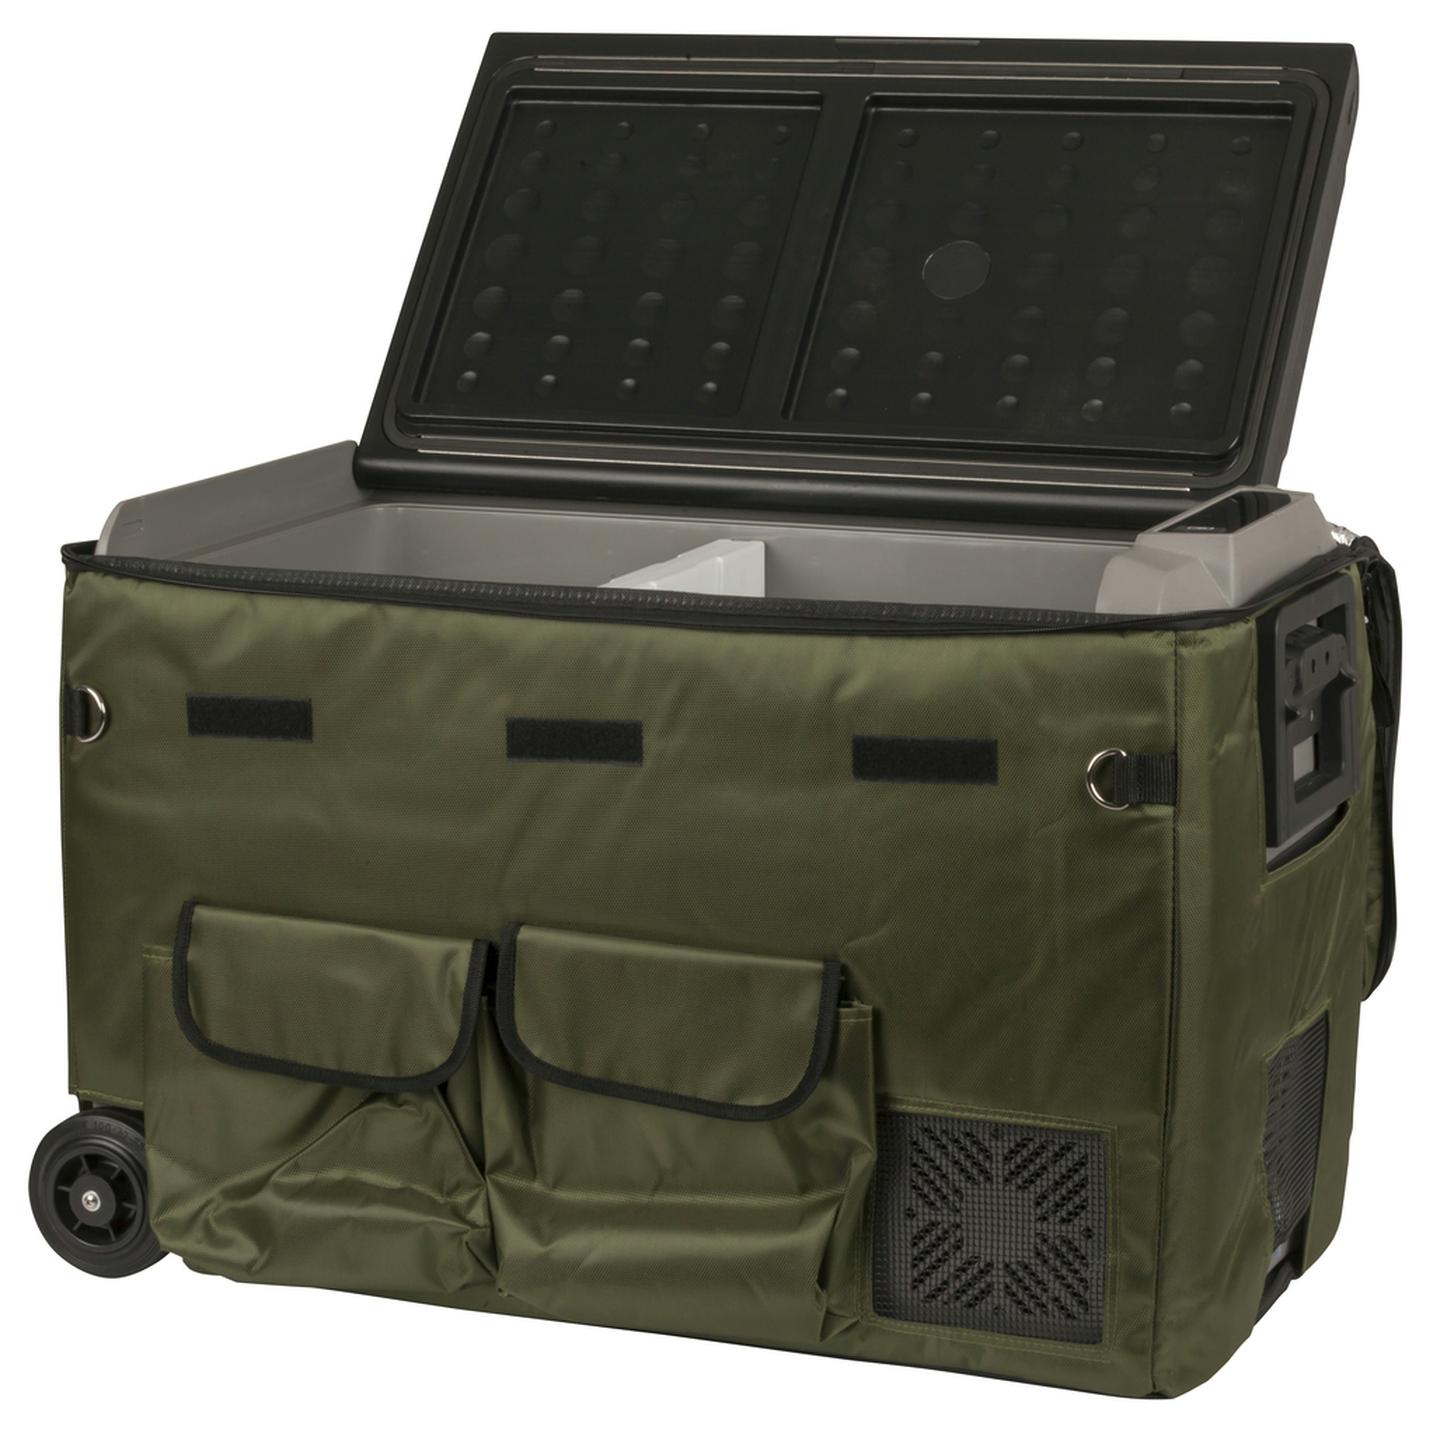 Green Insulated Cover for 36L Brass Monkey Portable Fridge/Freezer